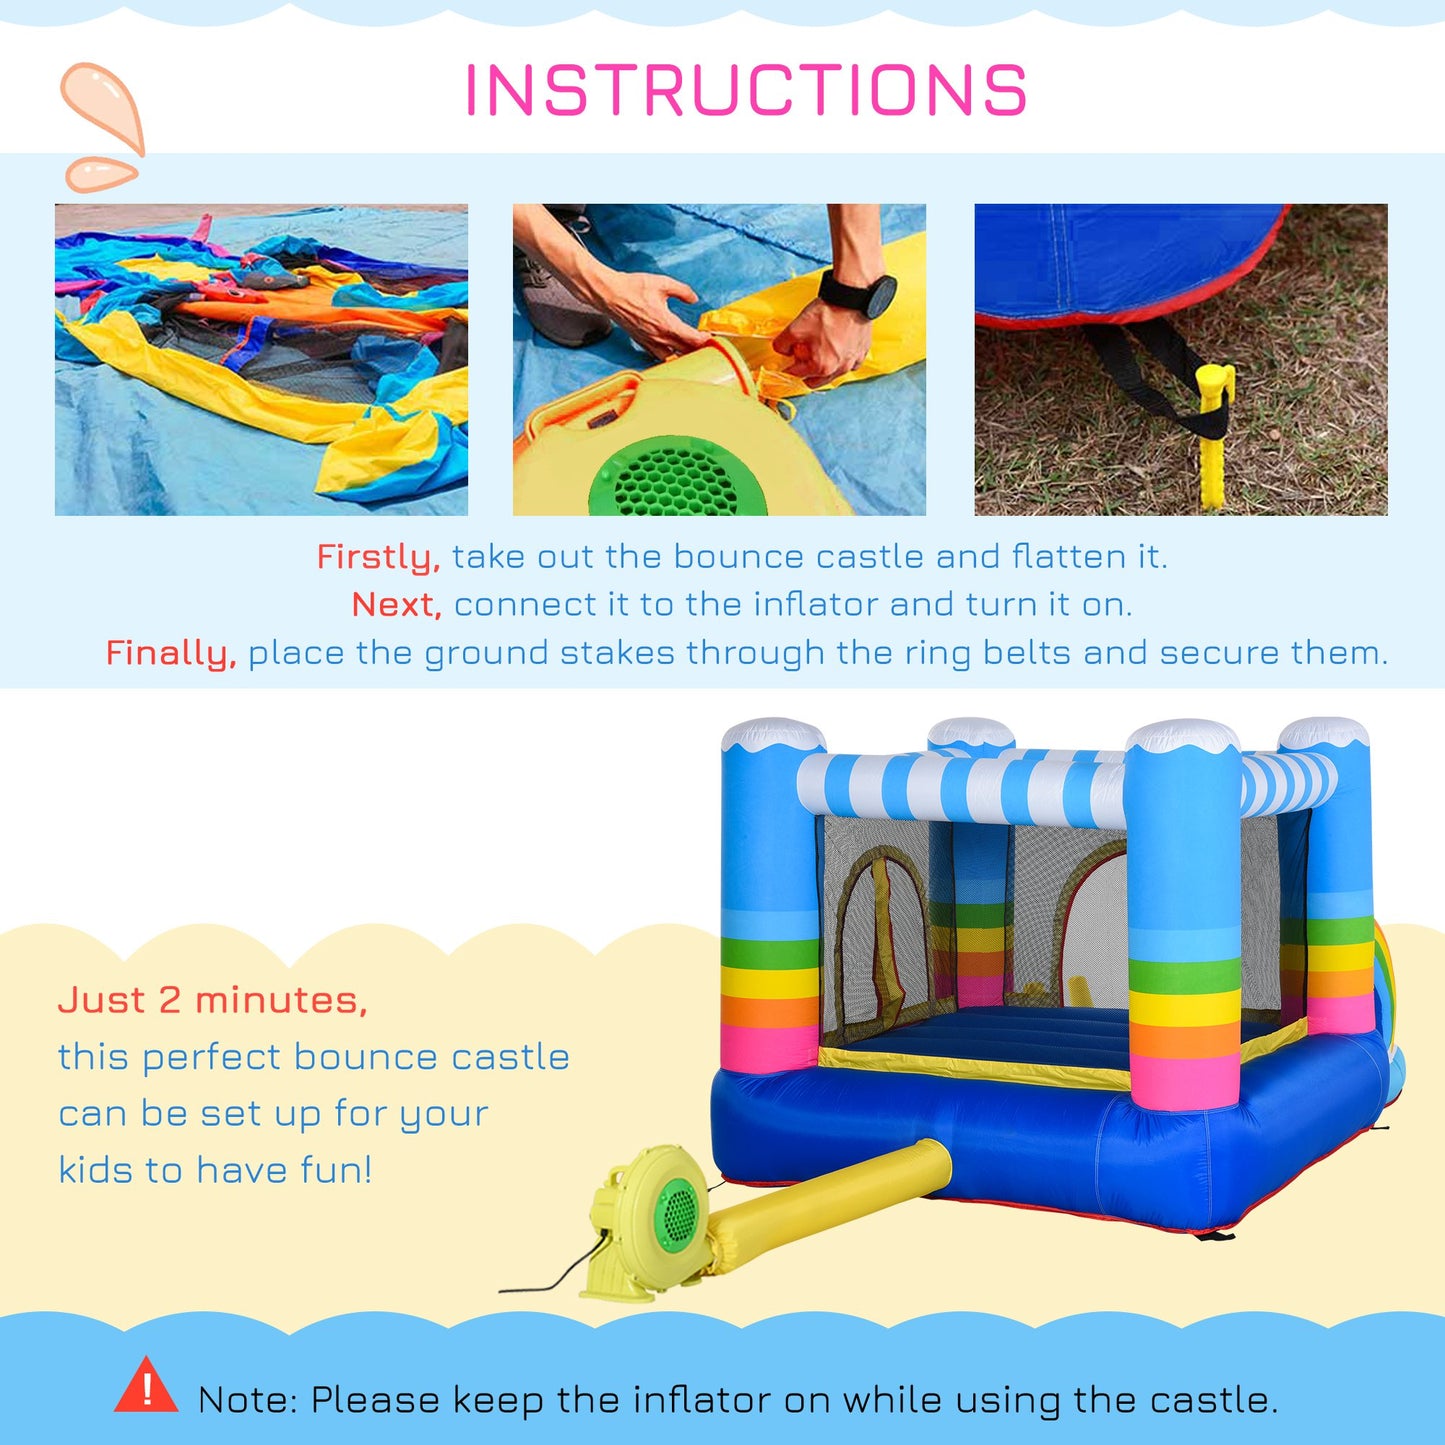 Outsunny Kids Bouncy Castle House Inflatable Trampoline Water Pool 2 in 1 with Blower for Kids Age 3-12 Rainbow Design 2.9 x 2 x 1.55m